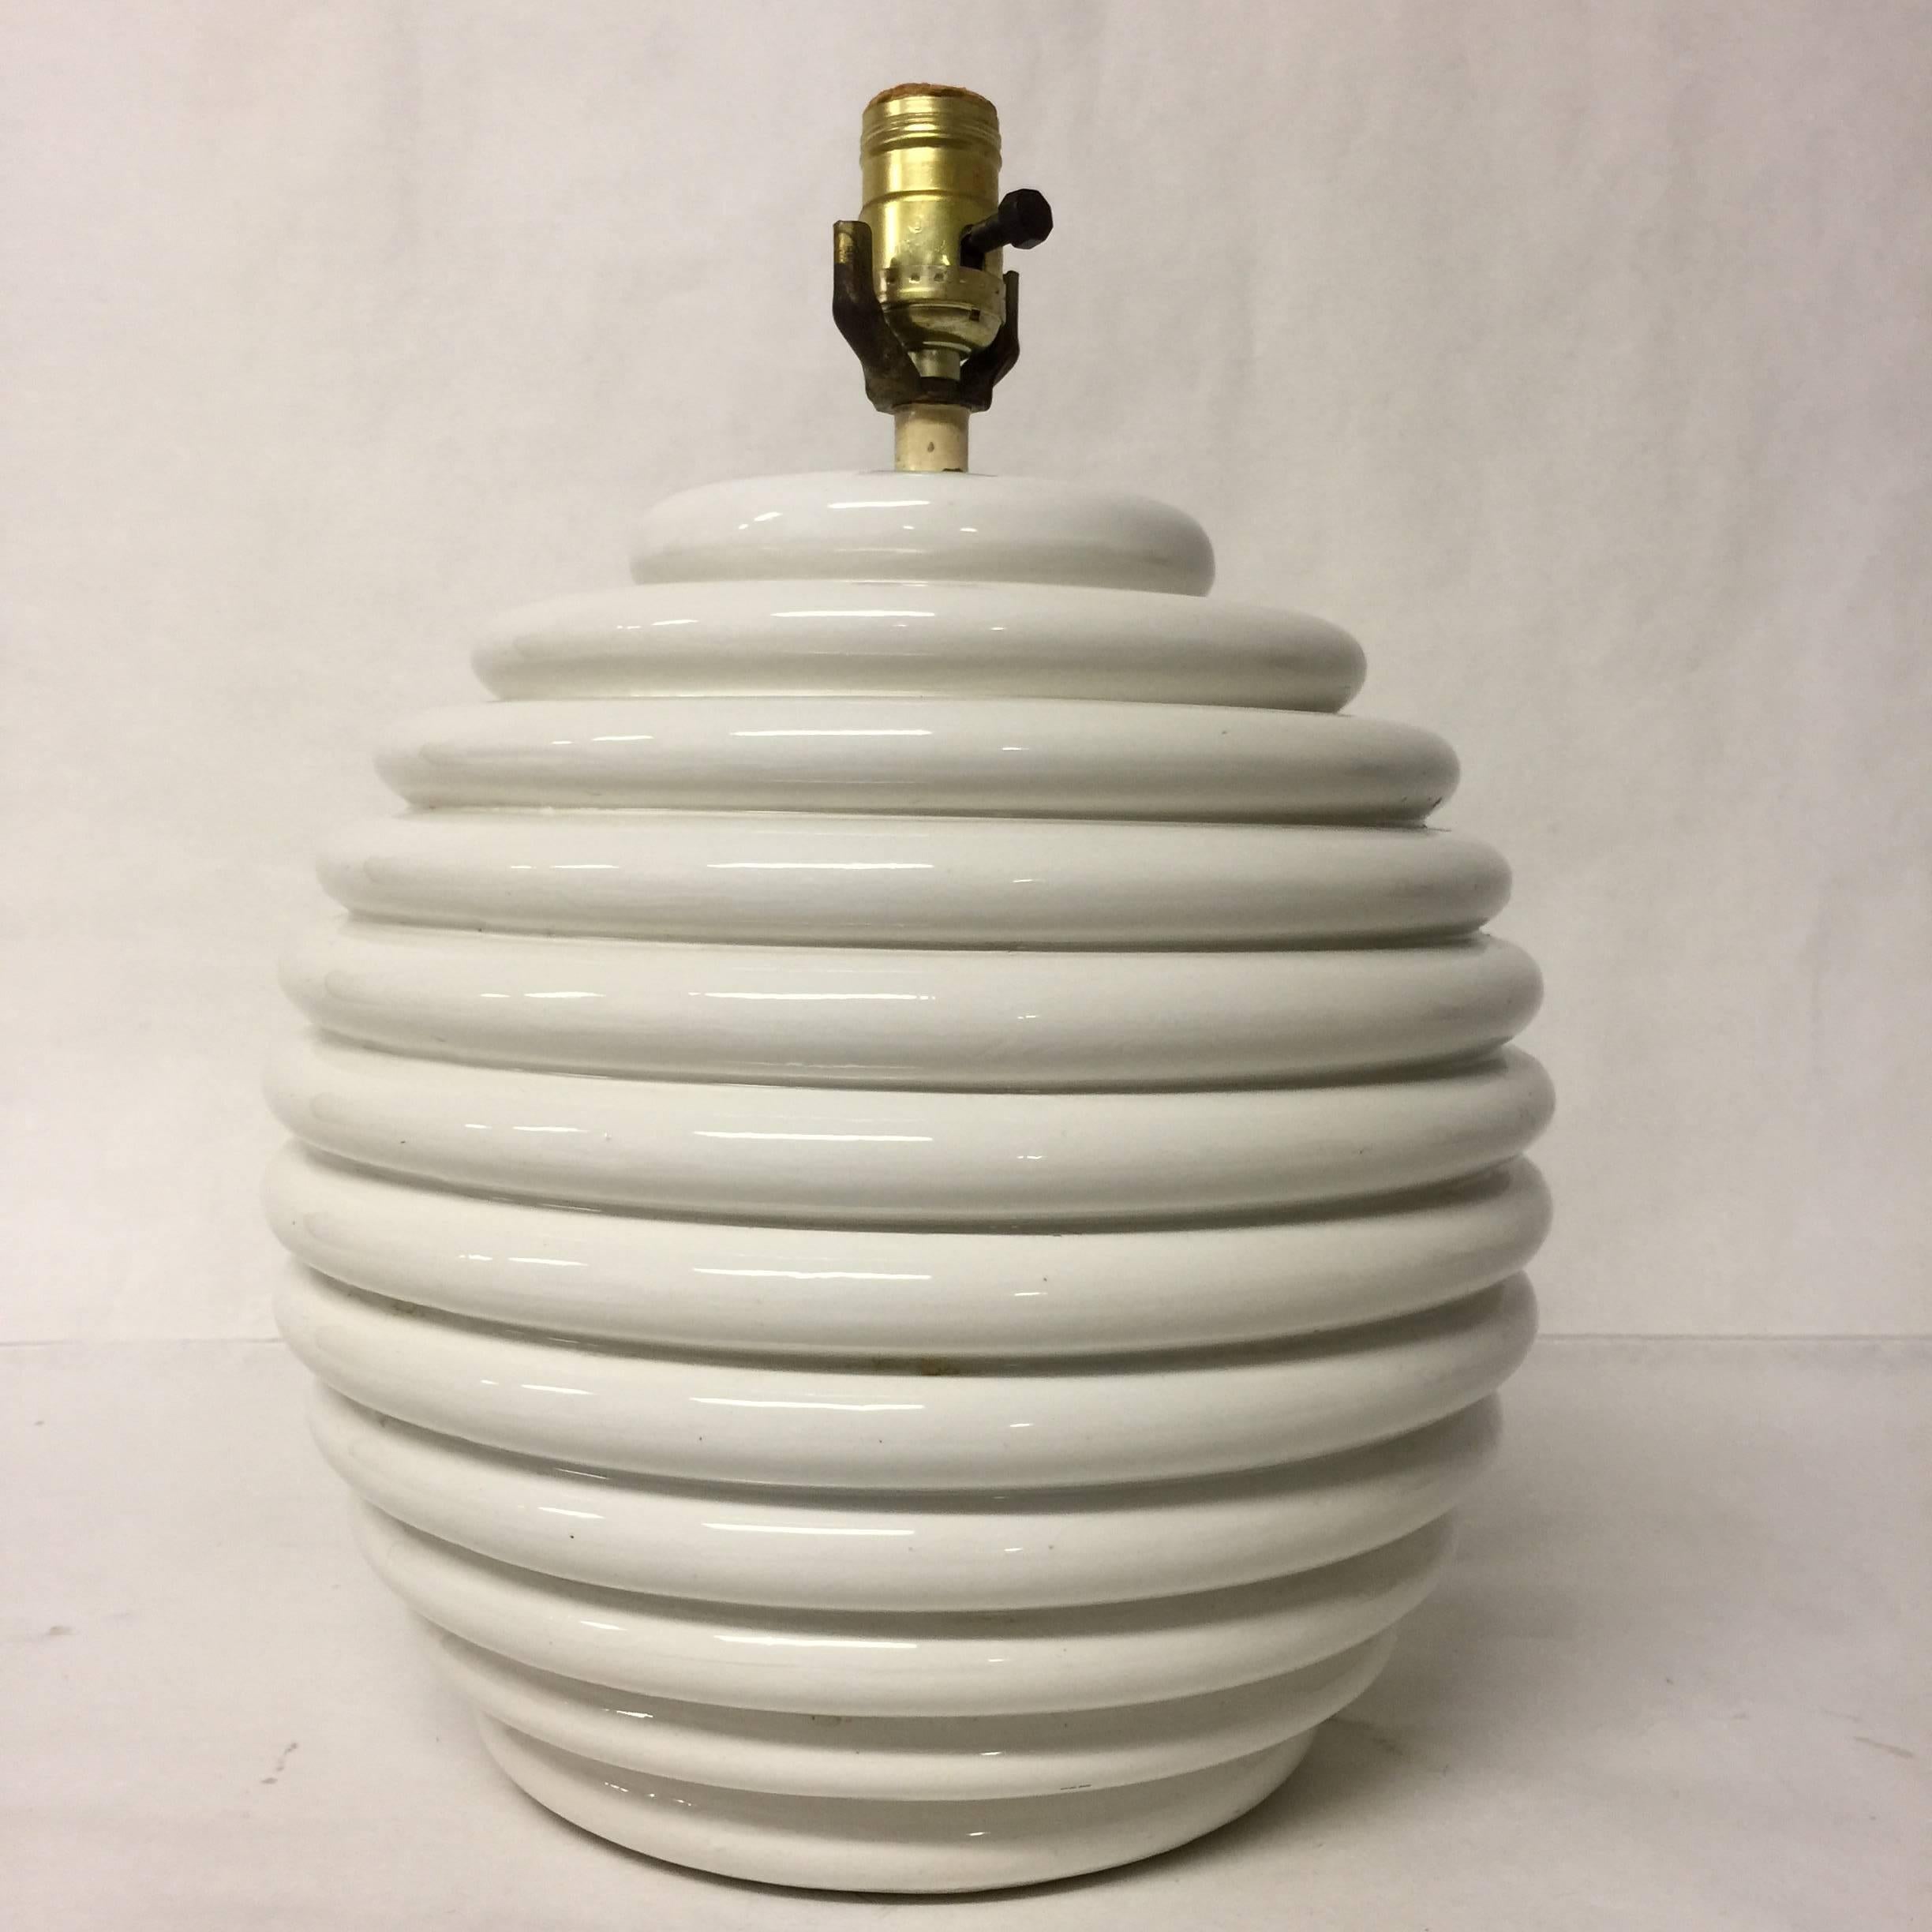 This vintage Italian table lamp has a 'base made in italy' label on the top and is signed on the bottom under the felt. It has a white, ribbed design on a rounded form. The lamp measures 15